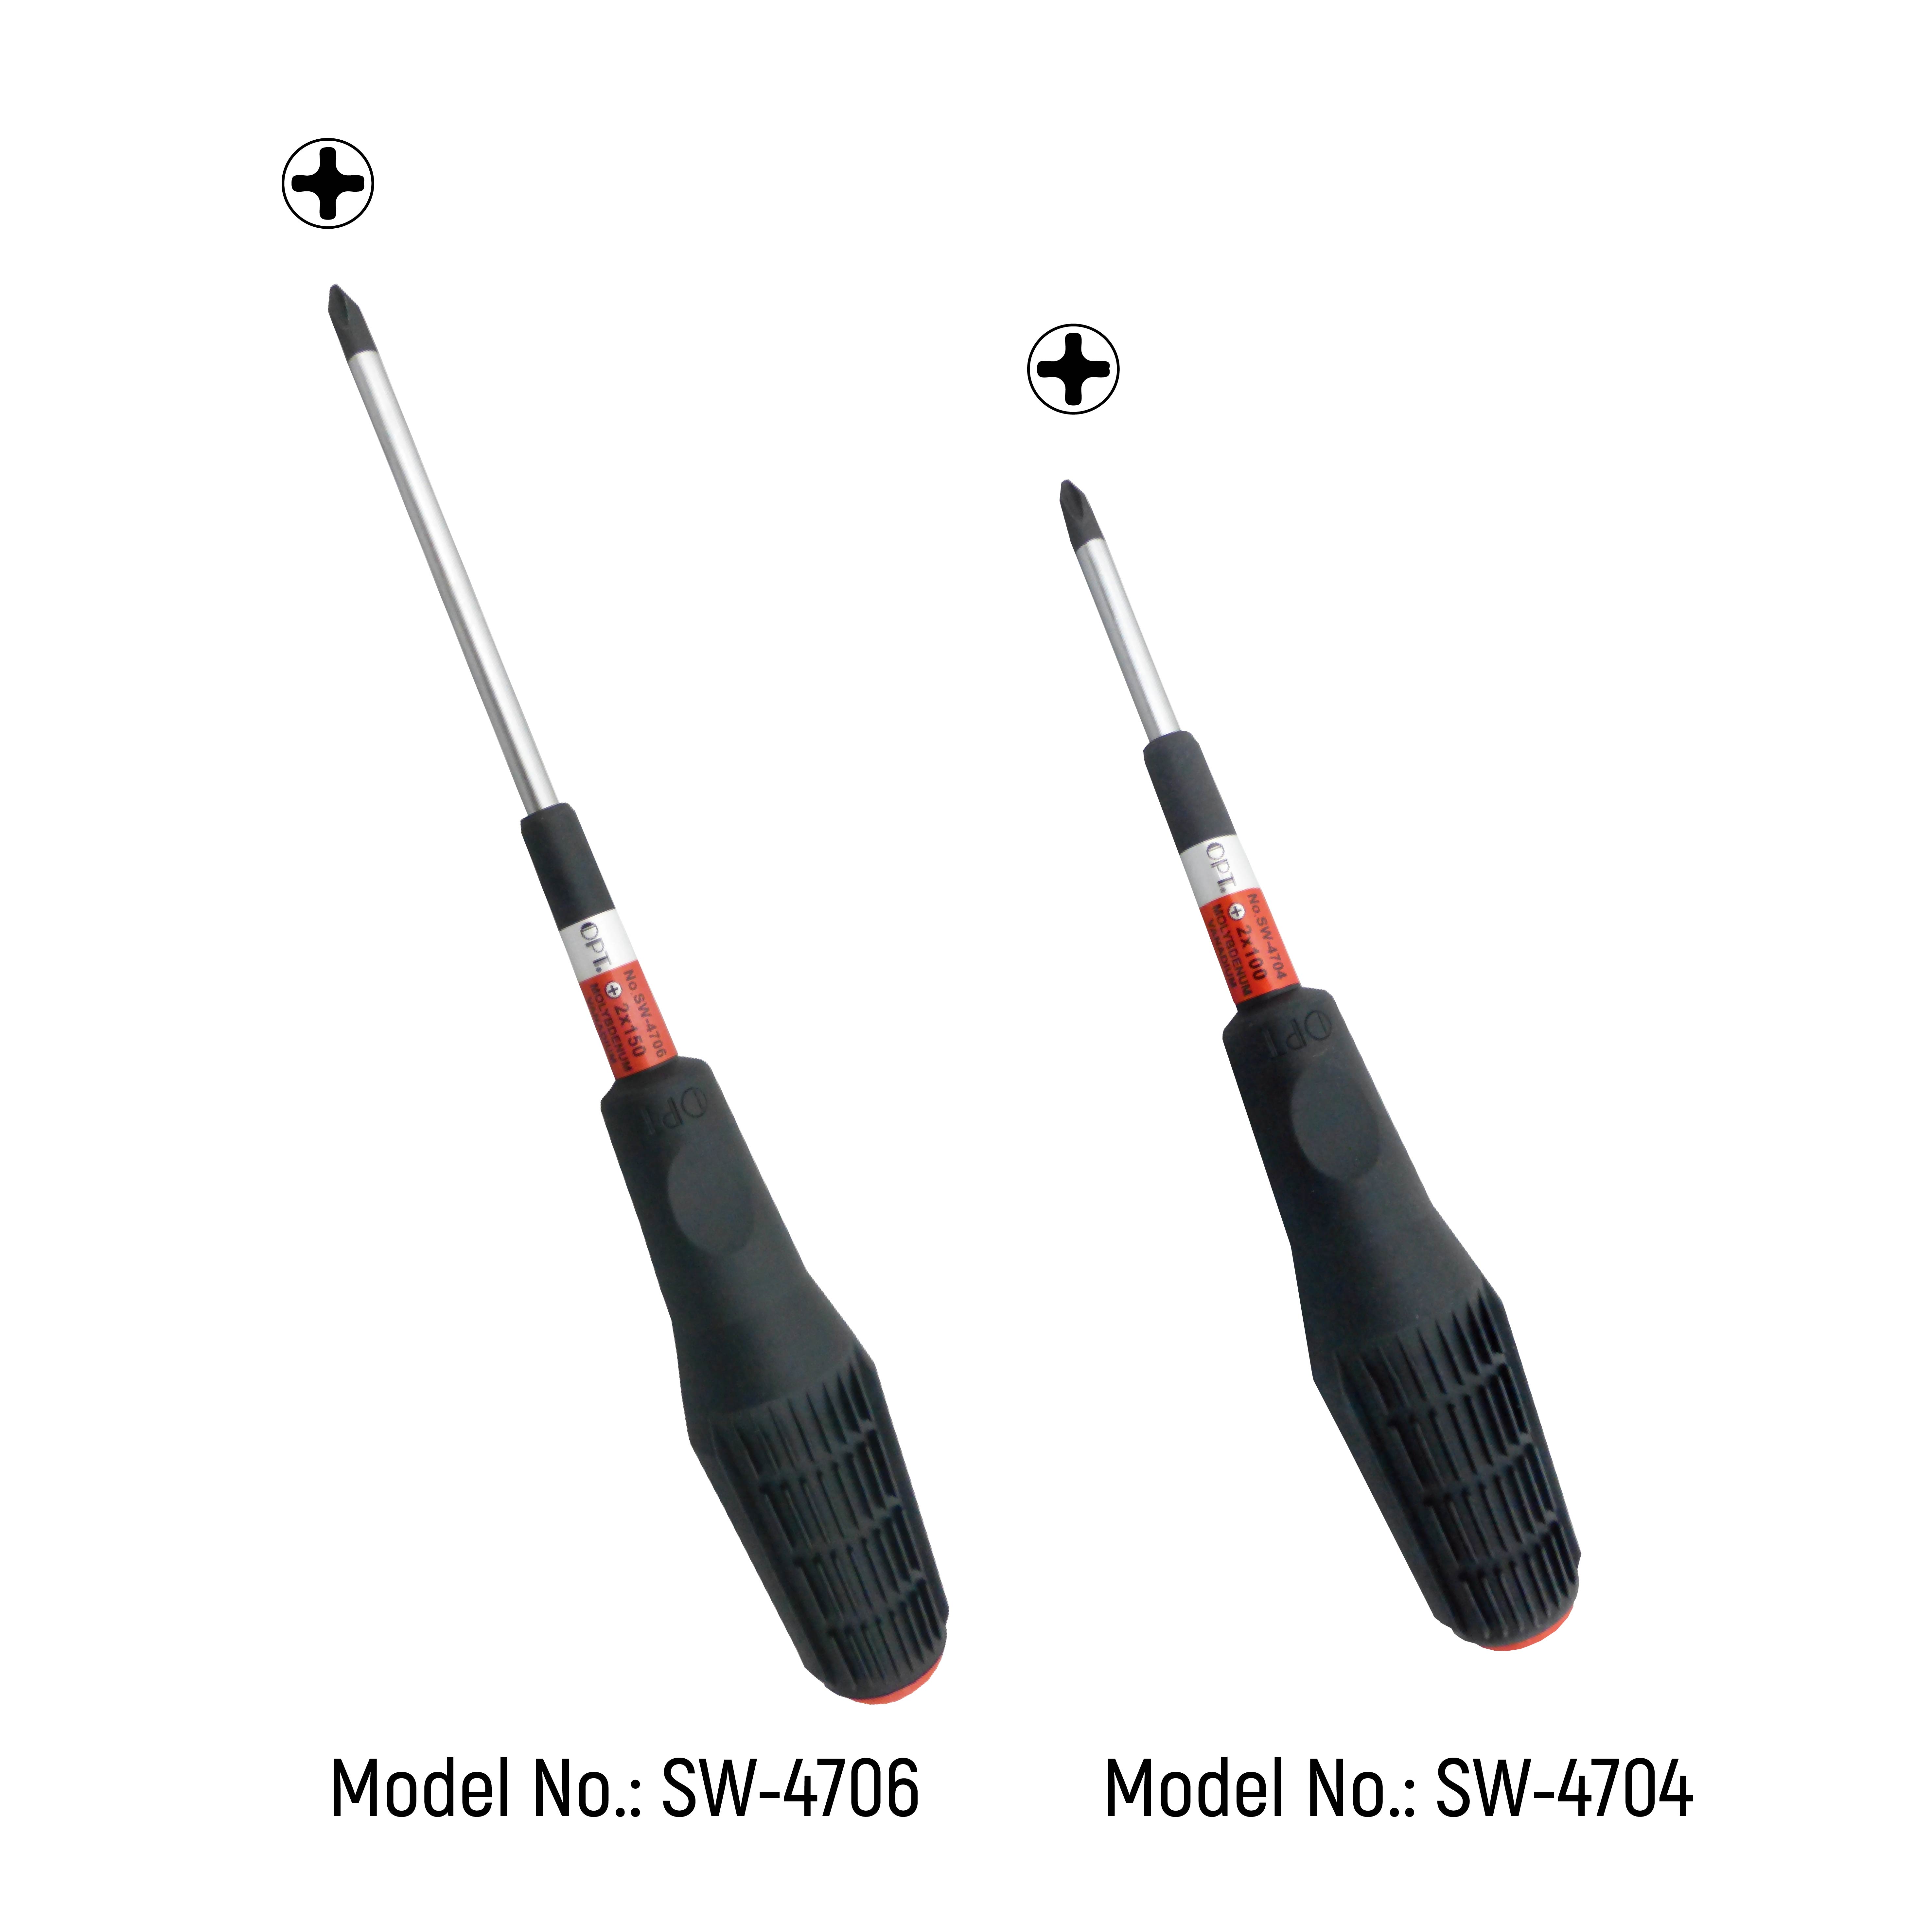 SCREWDRIVERS WITH TPR HANDLES